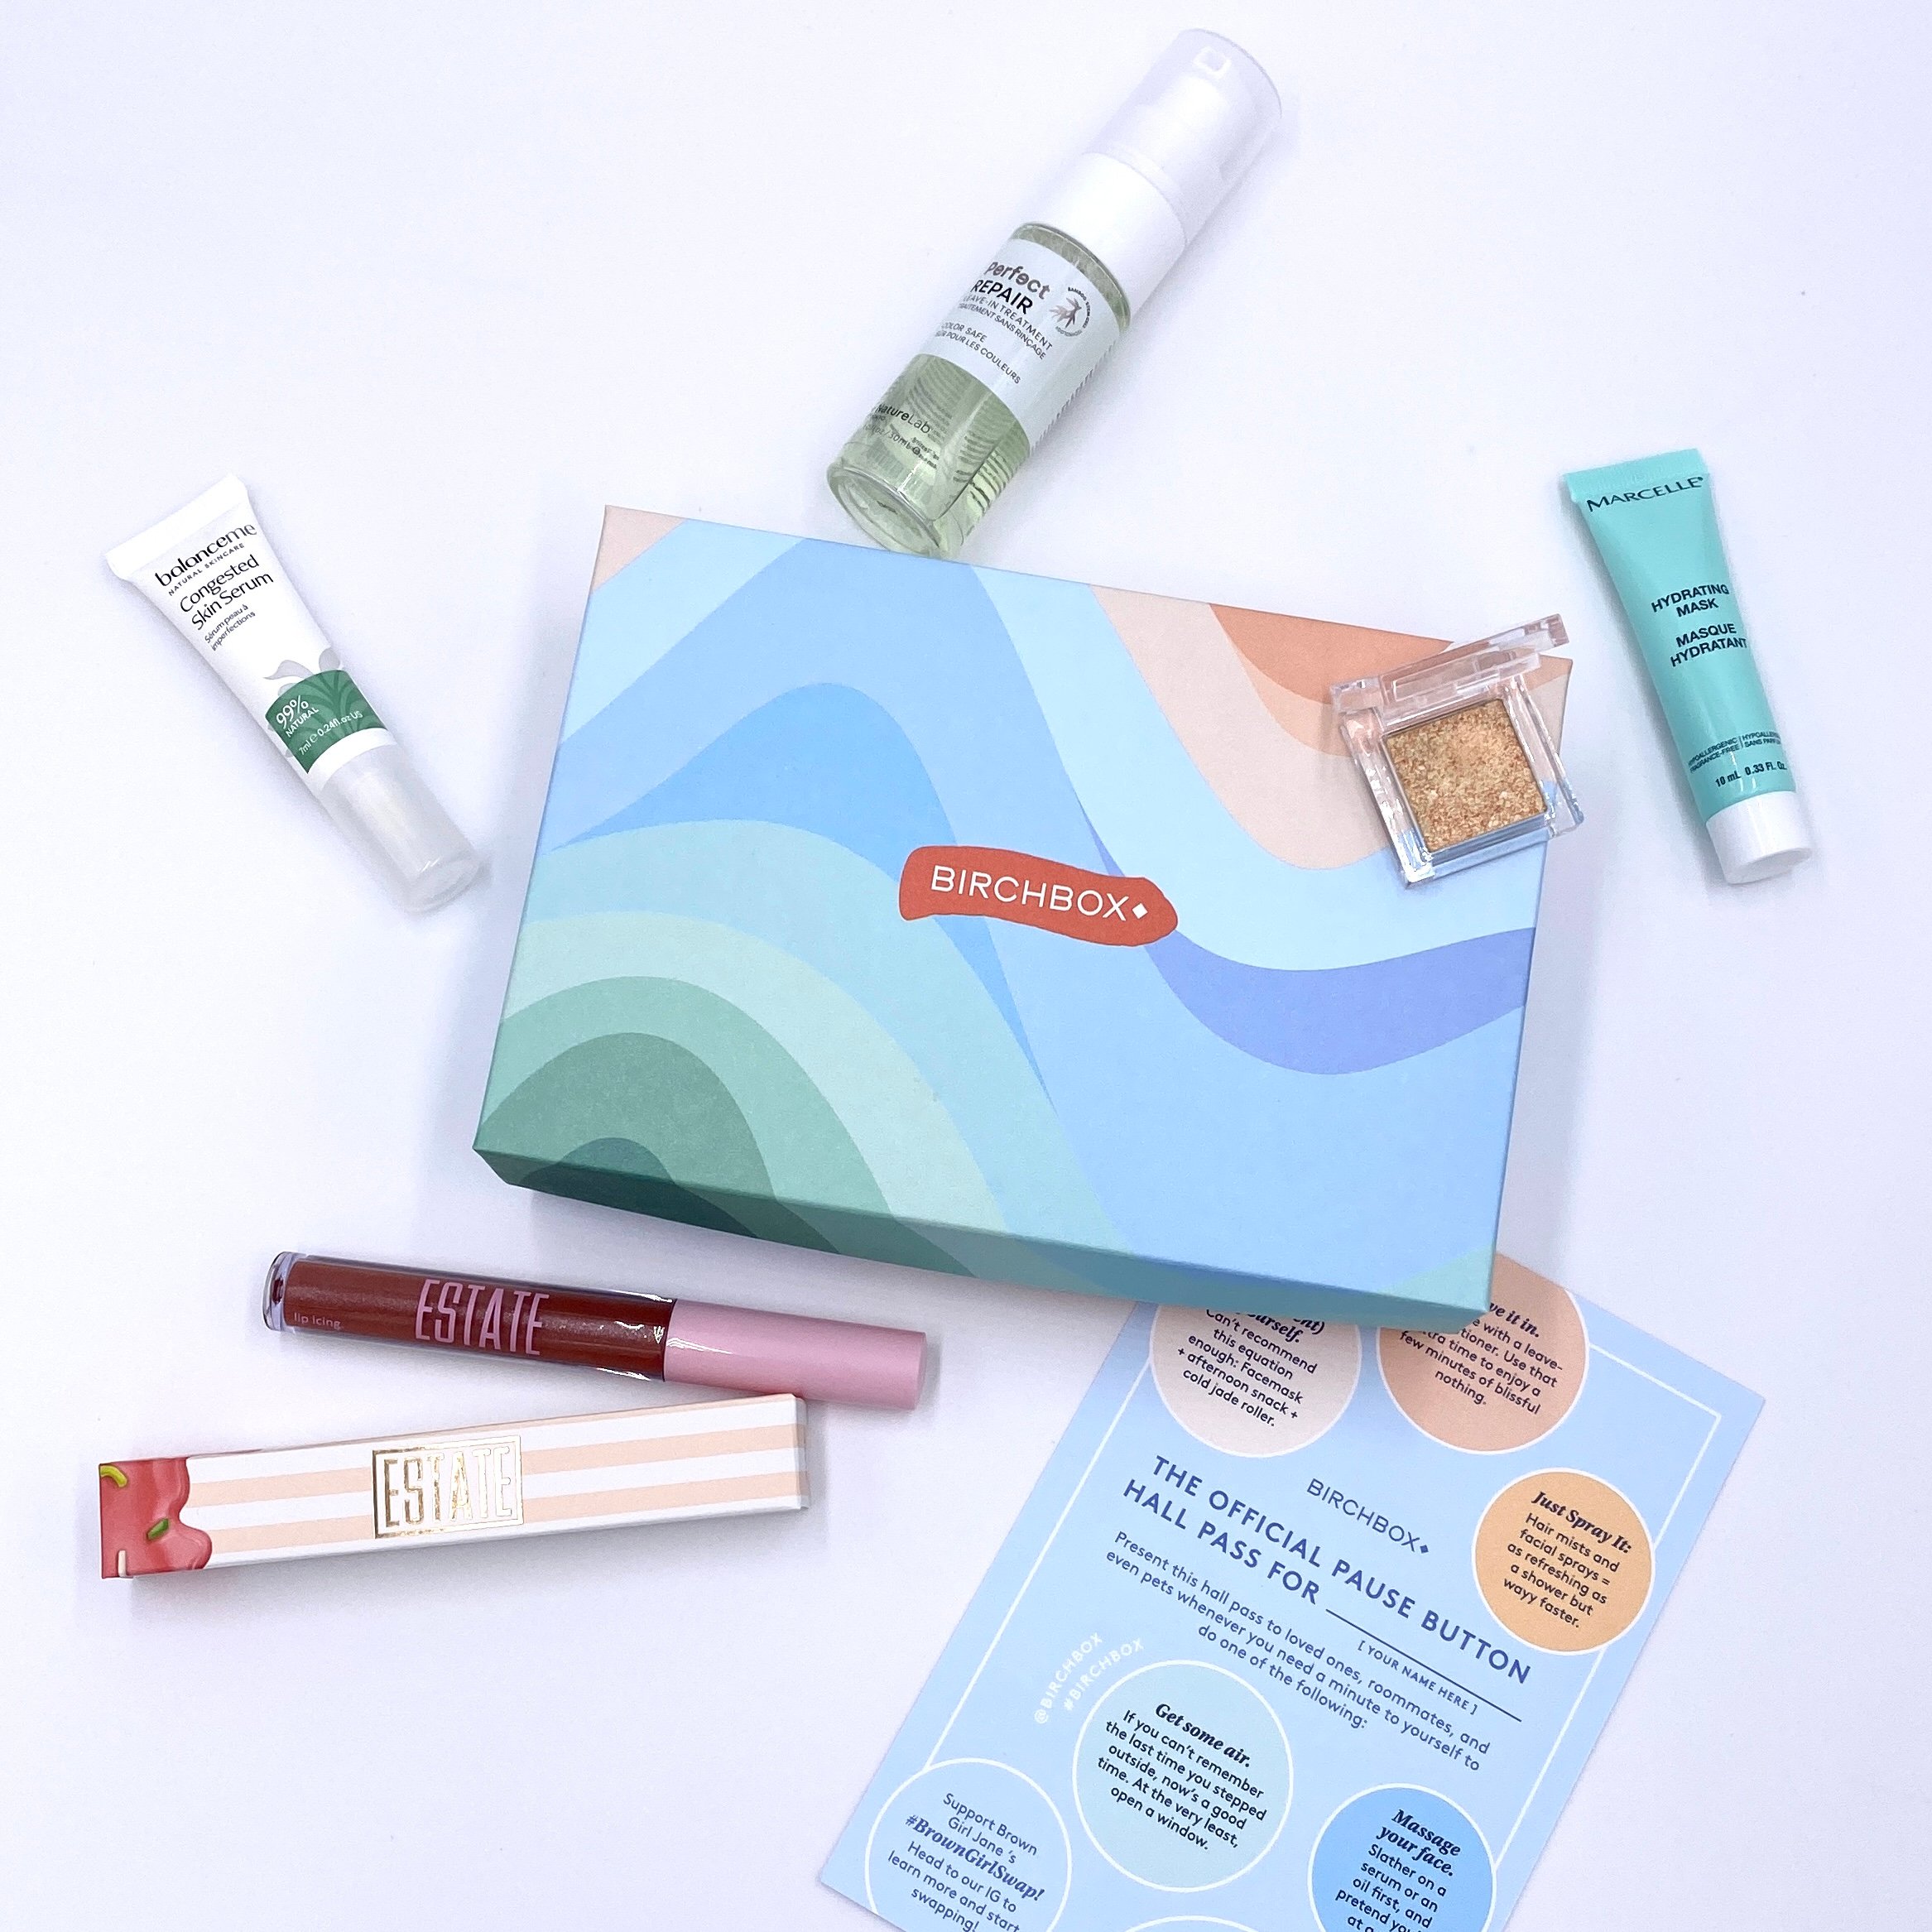 Full Contents for Birchbox February 2021